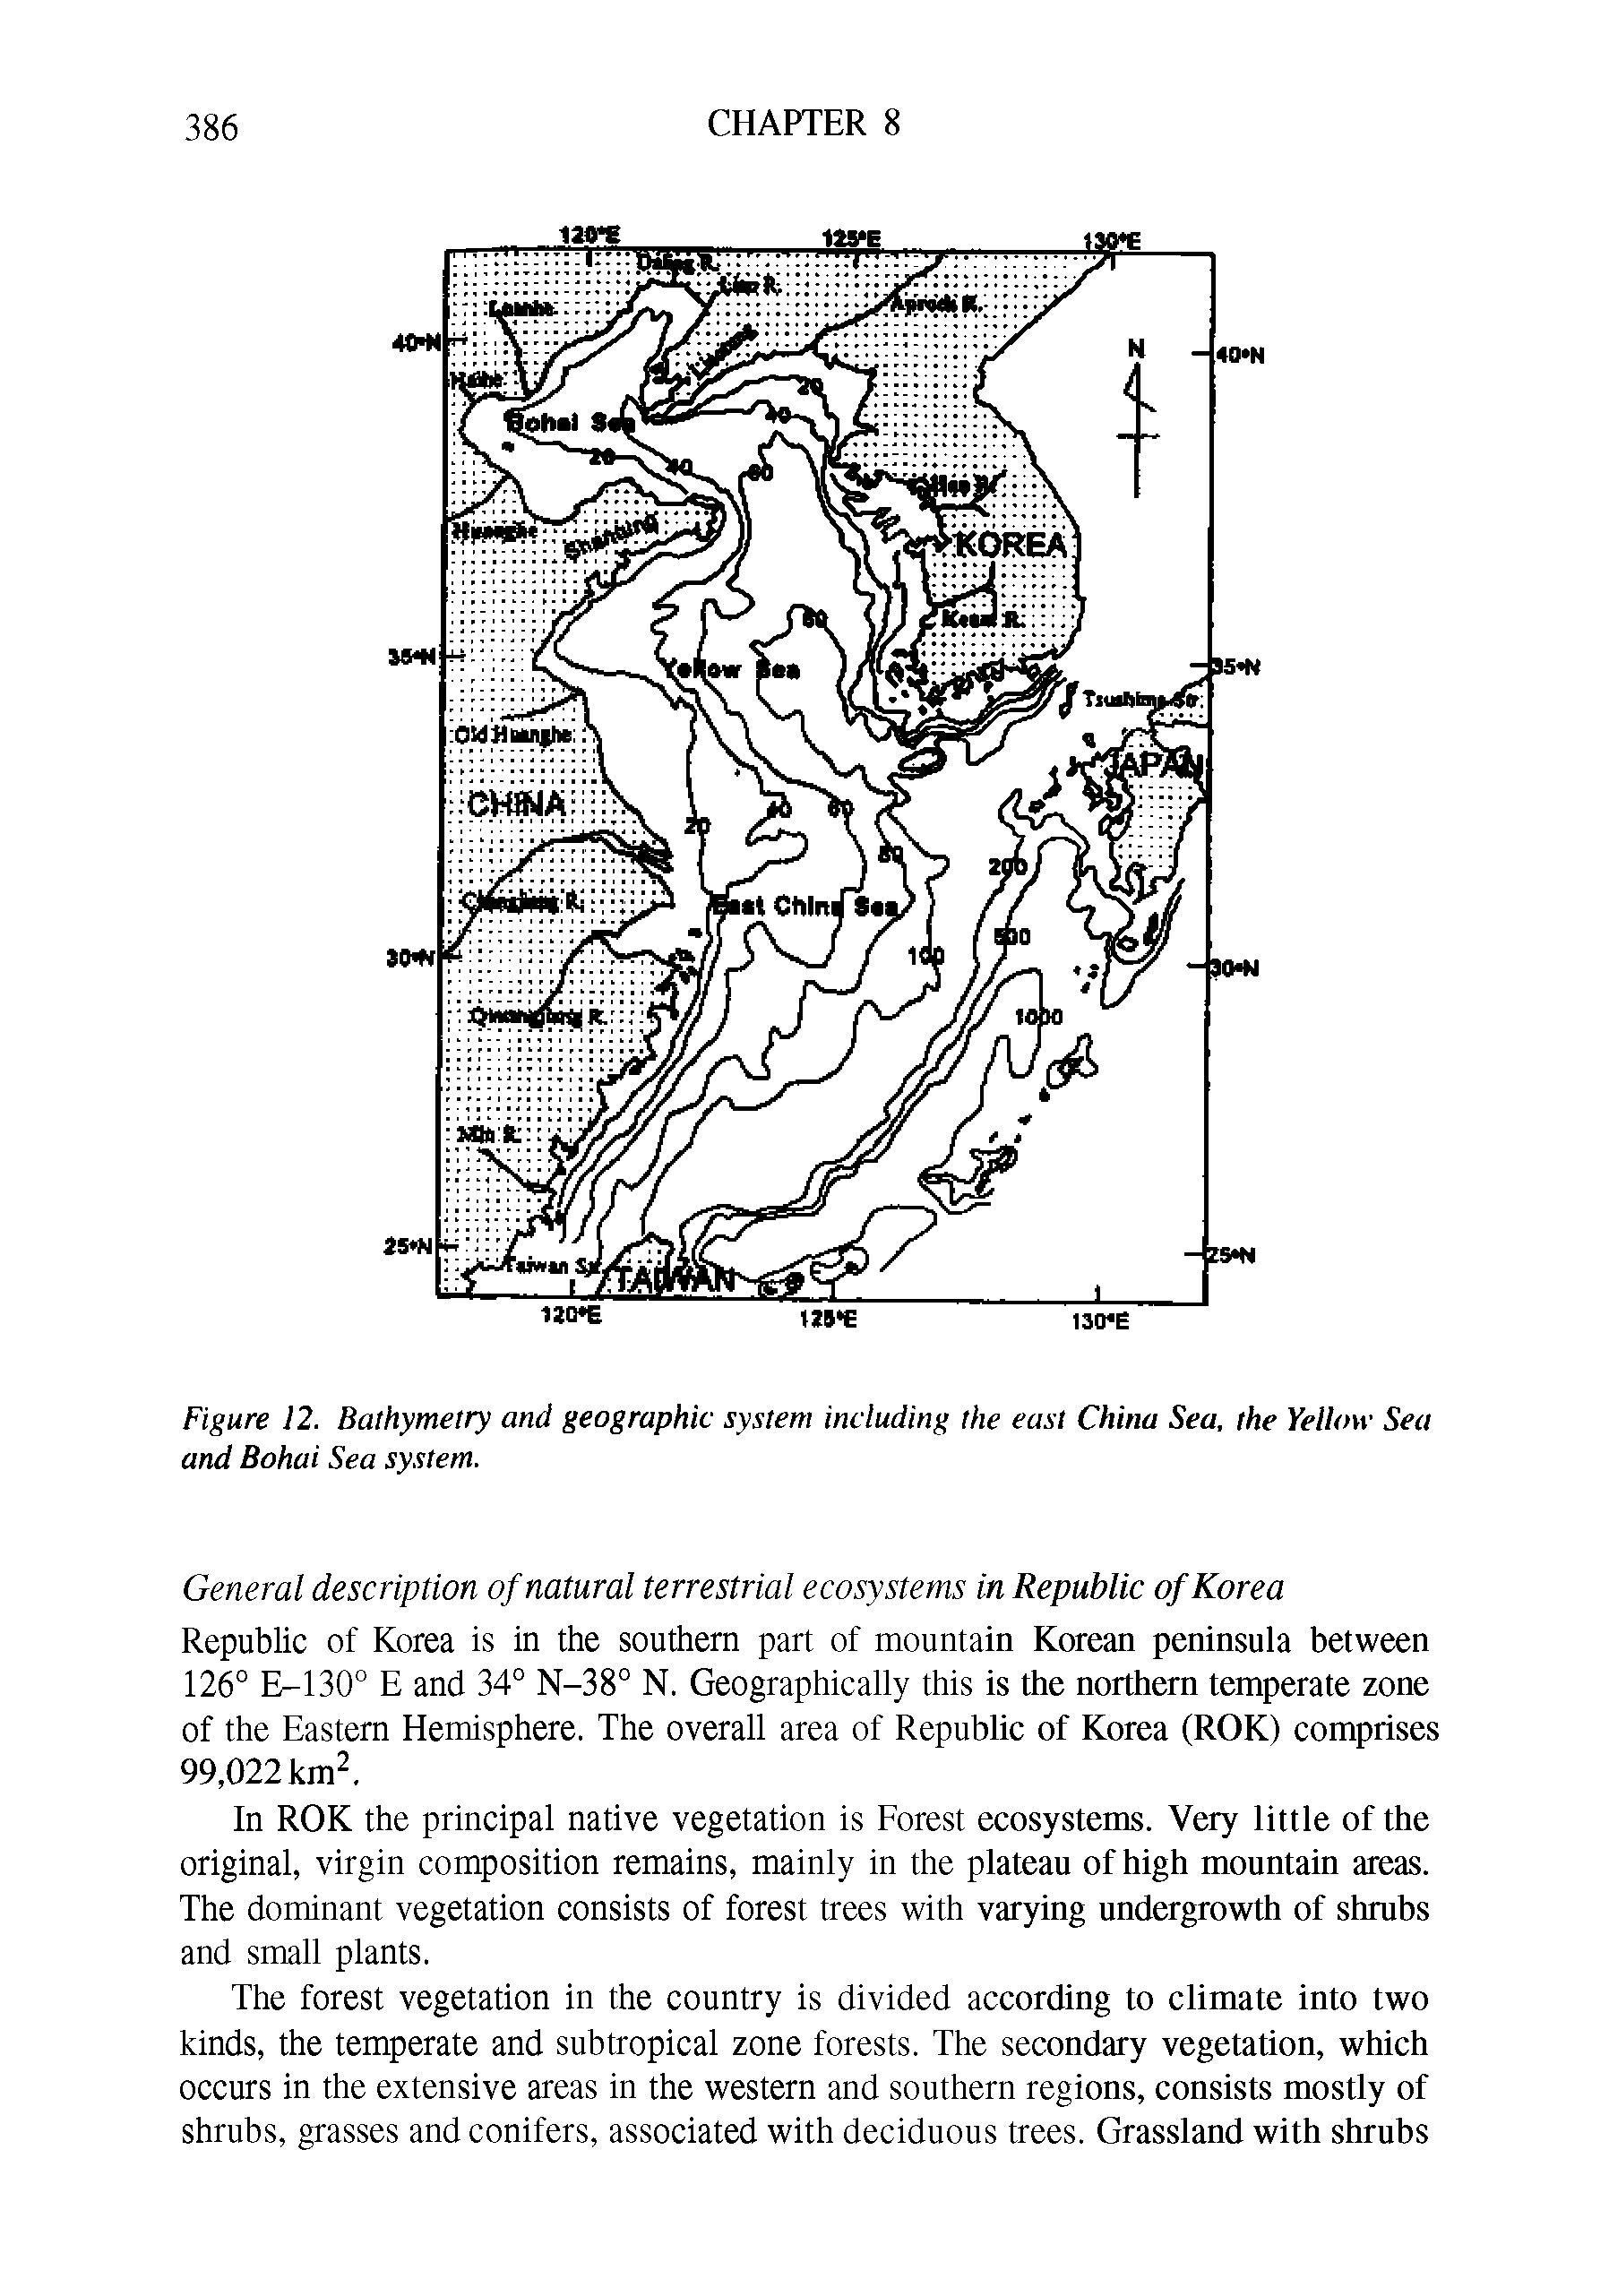 Figure 12. Bathymetry and geographic system including the east China Sea, the Yellow Sea and Bohai Sea sy.stem.